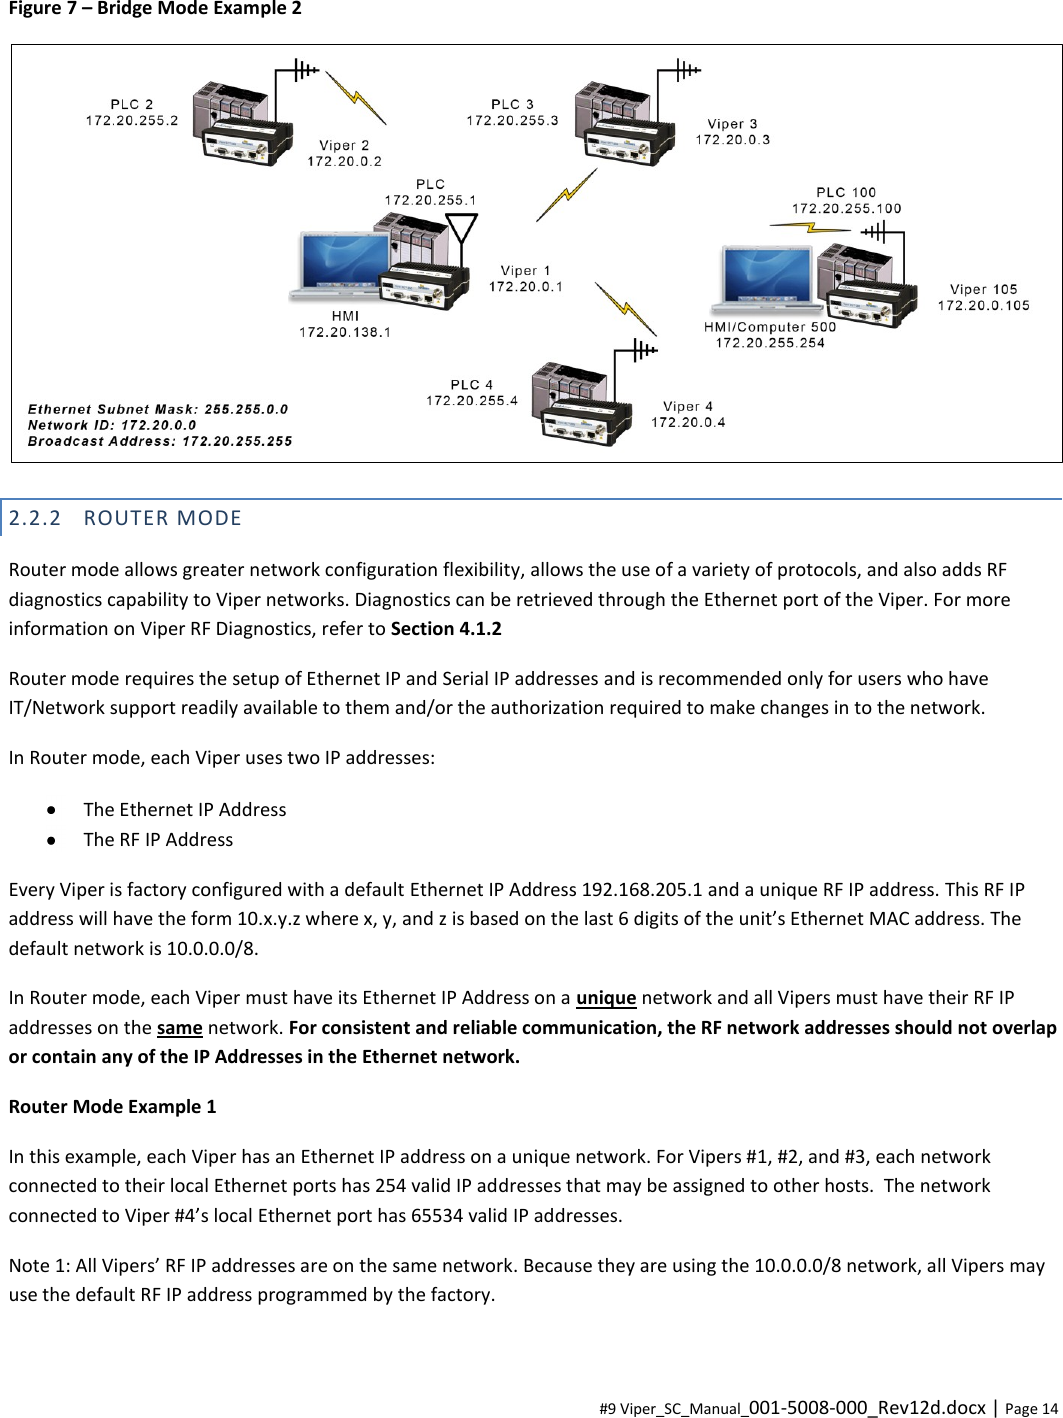  #9 Viper_SC_Manual_001-5008-000_Rev12d.docx | Page 14 Figure 7 – Bridge Mode Example 2  2.2.2 ROUTER MODE Router mode allows greater network configuration flexibility, allows the use of a variety of protocols, and also adds RF diagnostics capability to Viper networks. Diagnostics can be retrieved through the Ethernet port of the Viper. For more information on Viper RF Diagnostics, refer to Section 4.1.2 Router mode requires the setup of Ethernet IP and Serial IP addresses and is recommended only for users who have IT/Network support readily available to them and/or the authorization required to make changes in to the network. In Router mode, each Viper uses two IP addresses:   The Ethernet IP Address   The RF IP Address Every Viper is factory configured with a default Ethernet IP Address 192.168.205.1 and a unique RF IP address. This RF IP address will have the form 10.x.y.z where x, y, and z is based on the last 6 digits of the unit’s Ethernet MAC address. The default network is 10.0.0.0/8.   In Router mode, each Viper must have its Ethernet IP Address on a unique network and all Vipers must have their RF IP addresses on the same network. For consistent and reliable communication, the RF network addresses should not overlap or contain any of the IP Addresses in the Ethernet network. Router Mode Example 1 In this example, each Viper has an Ethernet IP address on a unique network. For Vipers #1, #2, and #3, each network connected to their local Ethernet ports has 254 valid IP addresses that may be assigned to other hosts.  The network connected to Viper #4’s local Ethernet port has 65534 valid IP addresses. Note 1: All Vipers’ RF IP addresses are on the same network. Because they are using the 10.0.0.0/8 network, all Vipers may use the default RF IP address programmed by the factory. 